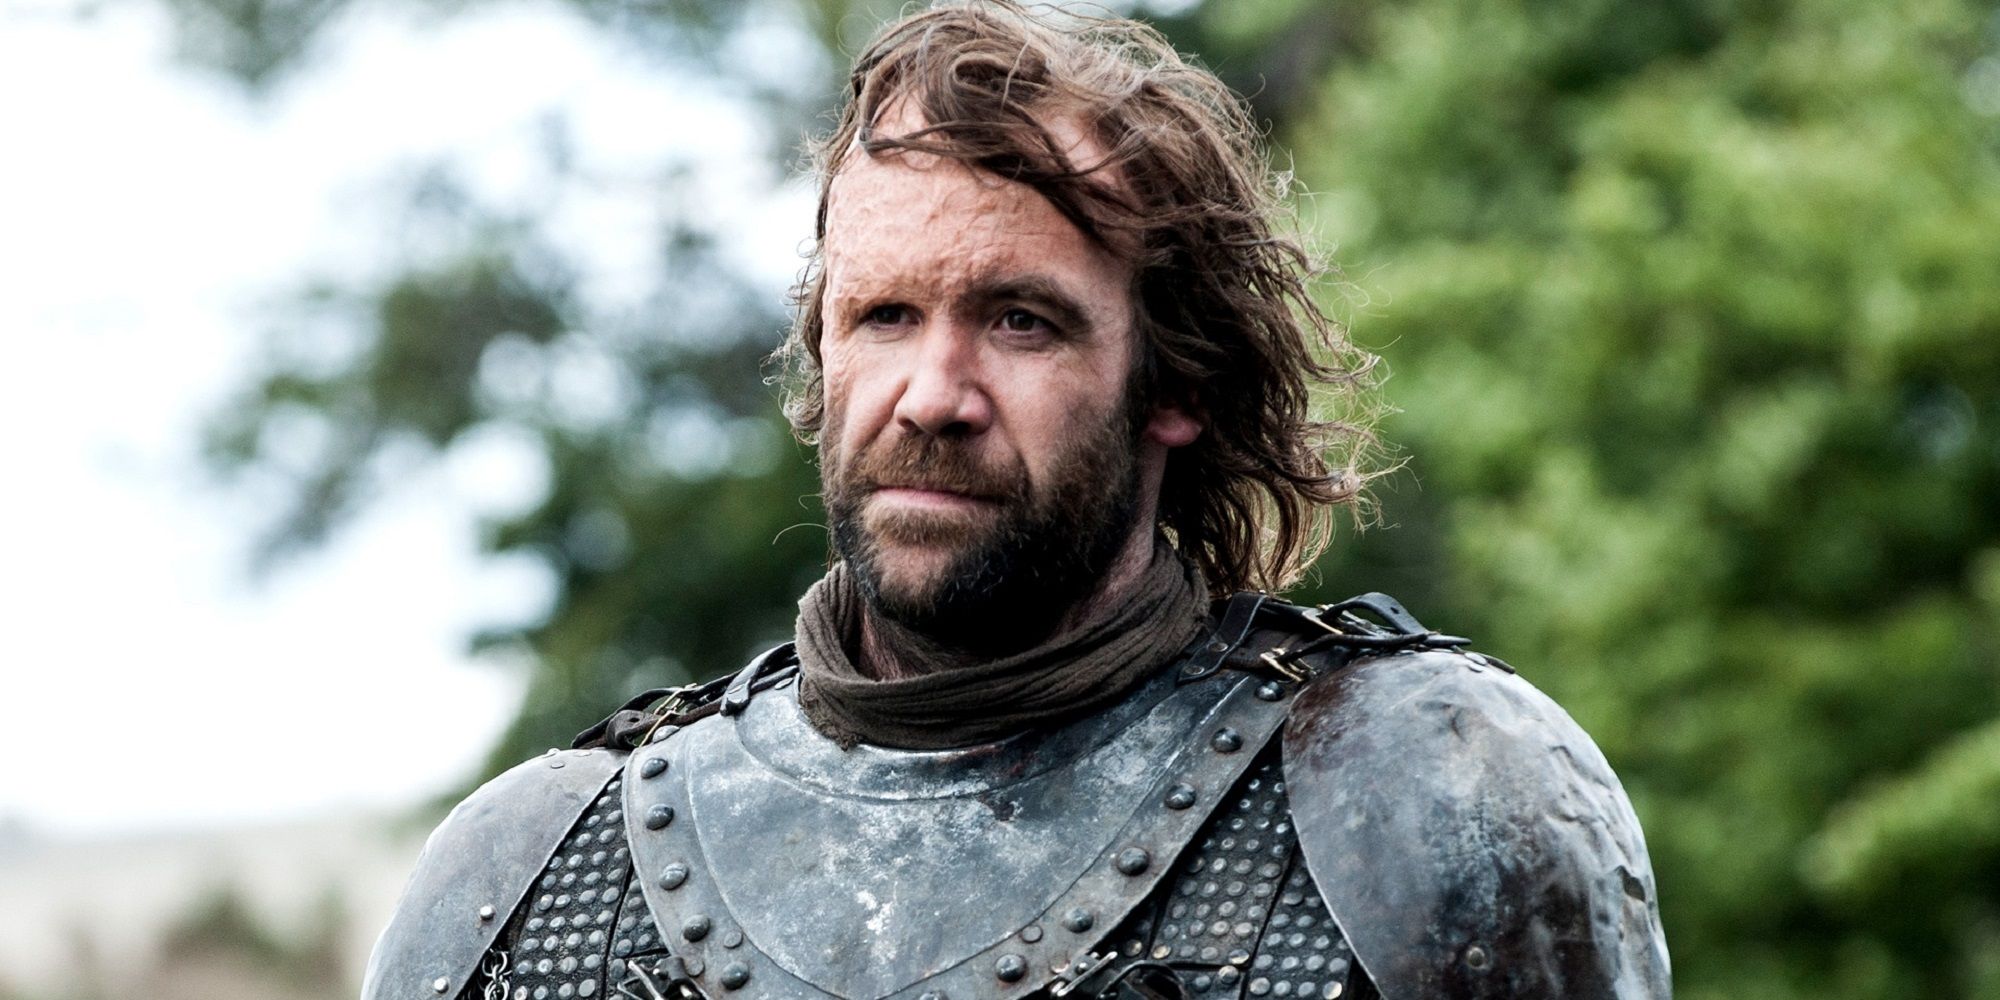 The Hound in armor